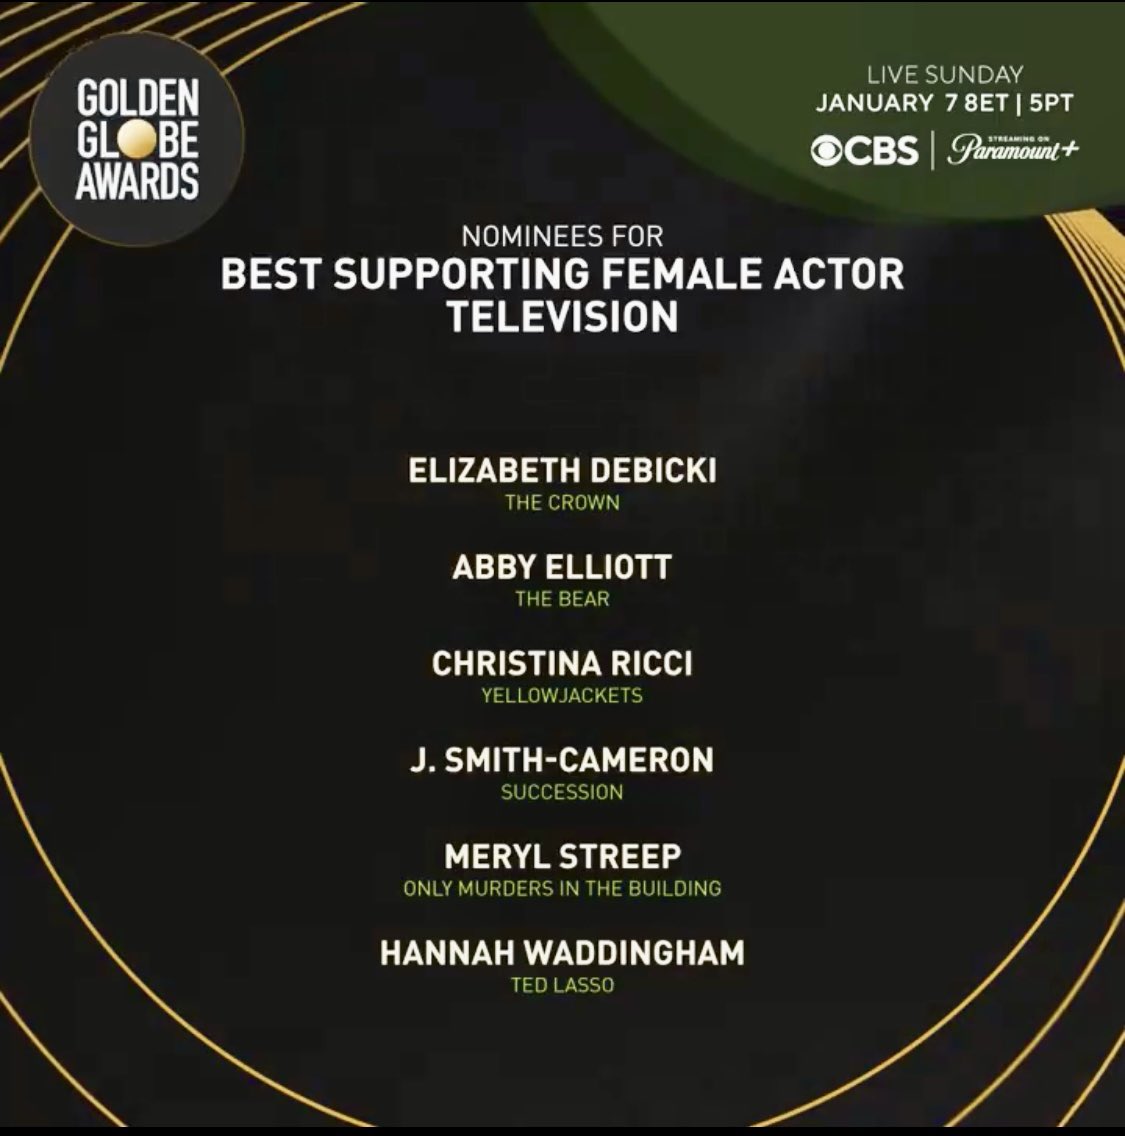 WHAAAAAAAAT THE FUUUUUUUUU!!!!!!!!!!!! I’ve died and gone to heaven! @goldenglobes I AM SHOOKETH!!!!! Thank you SO,SO MUCH. This list is the greatest gift! Thank you for including me. I’m FLOORED! ❤️❤️❤️❤️🙈🙈🙈